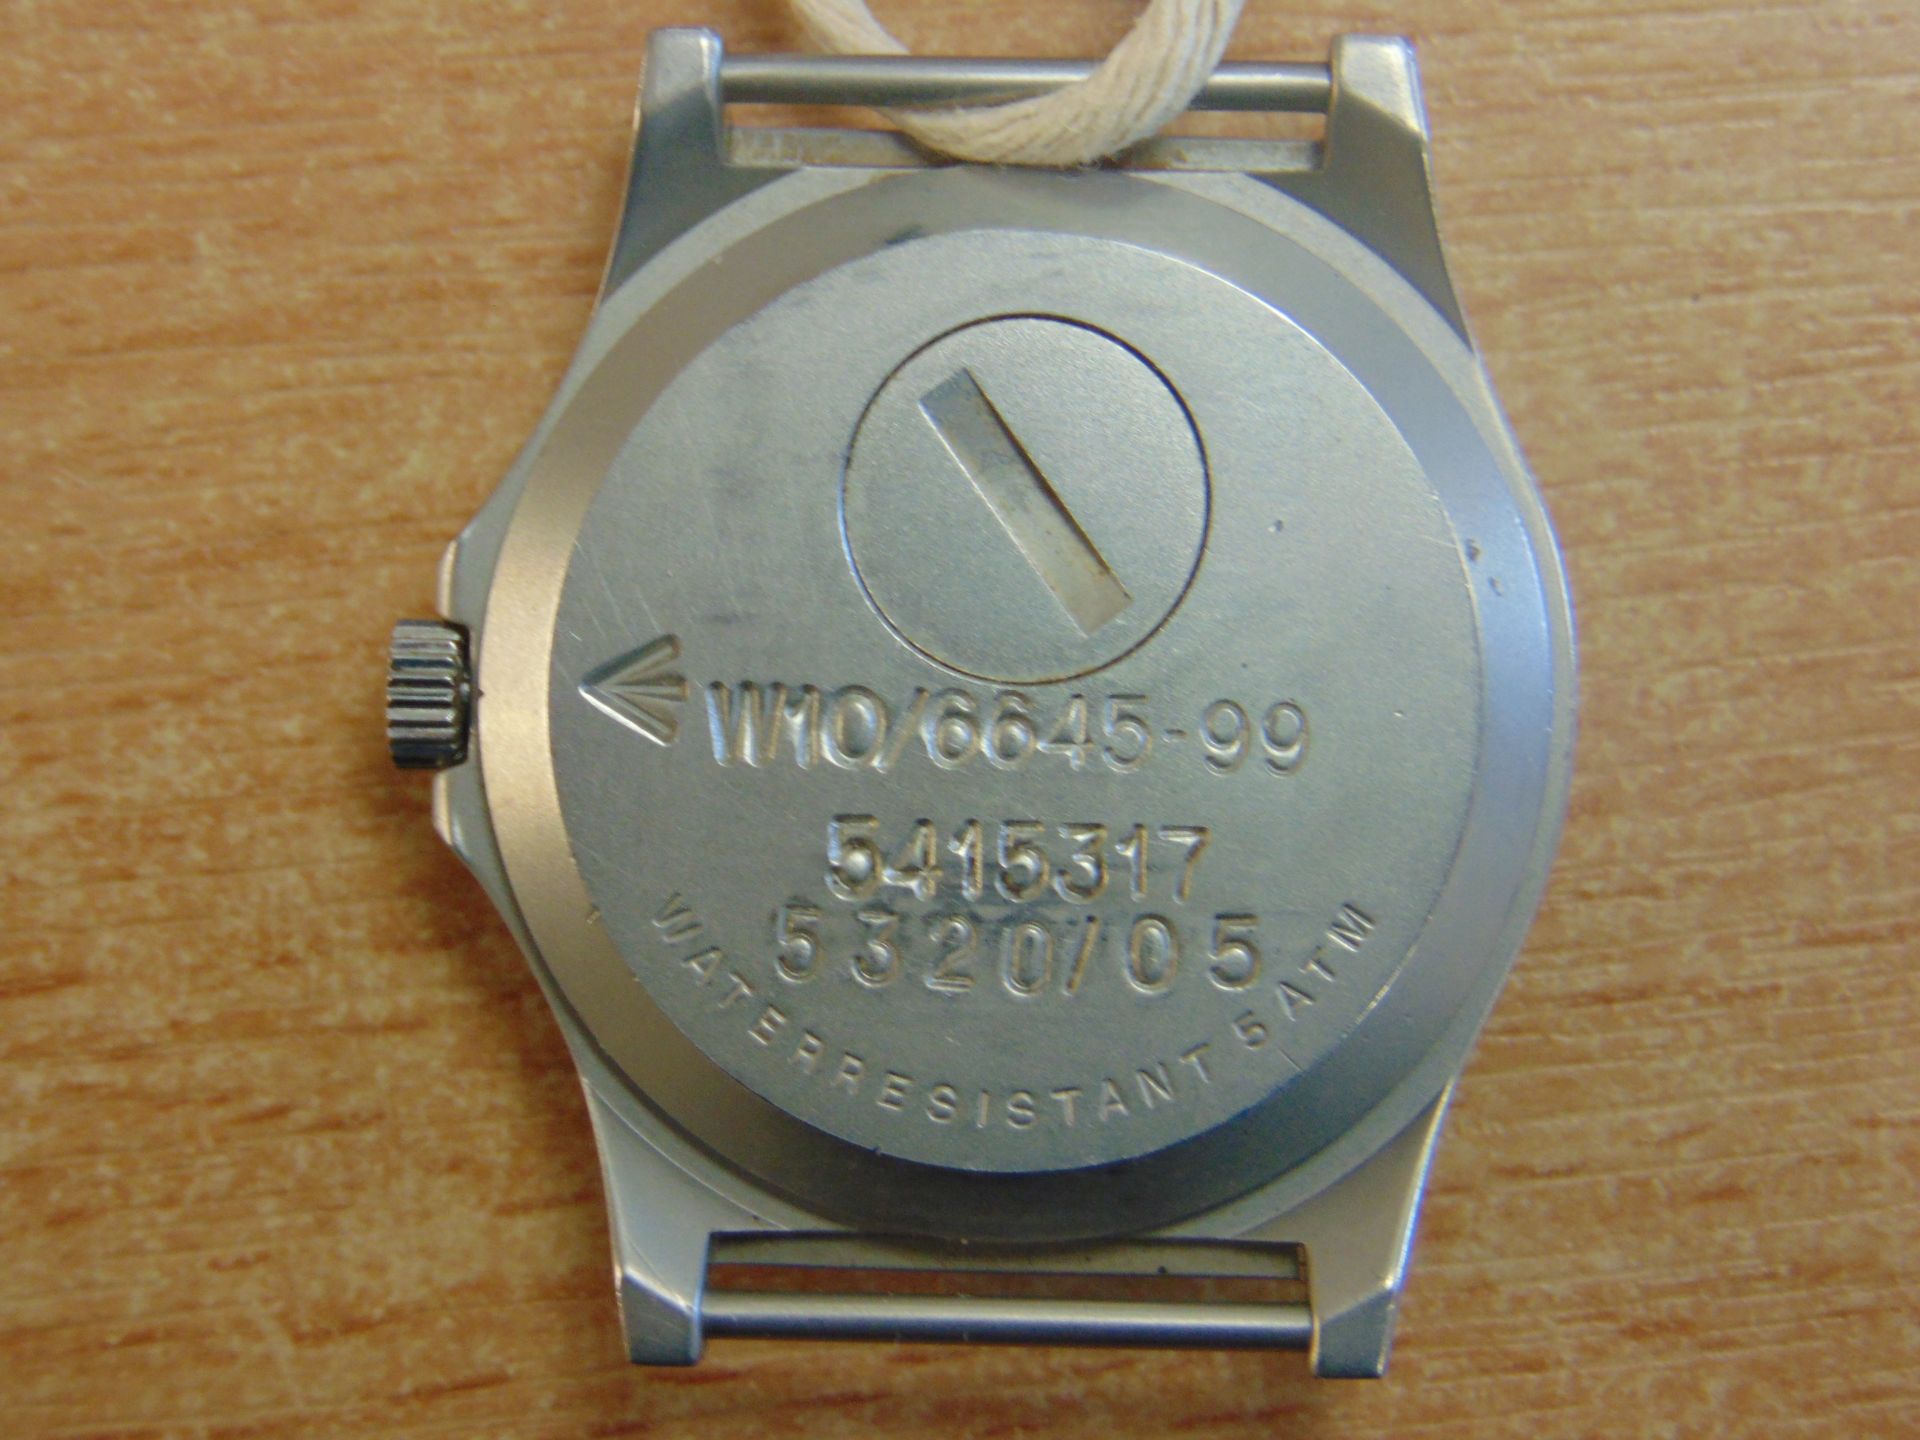 CWC W10 BRITISH ARMY SERVICE WATCH NATO MARKS DATE 2005 WATER RESISTANT TO 5 ATM GLASS CHIPPED - Bild 5 aus 6